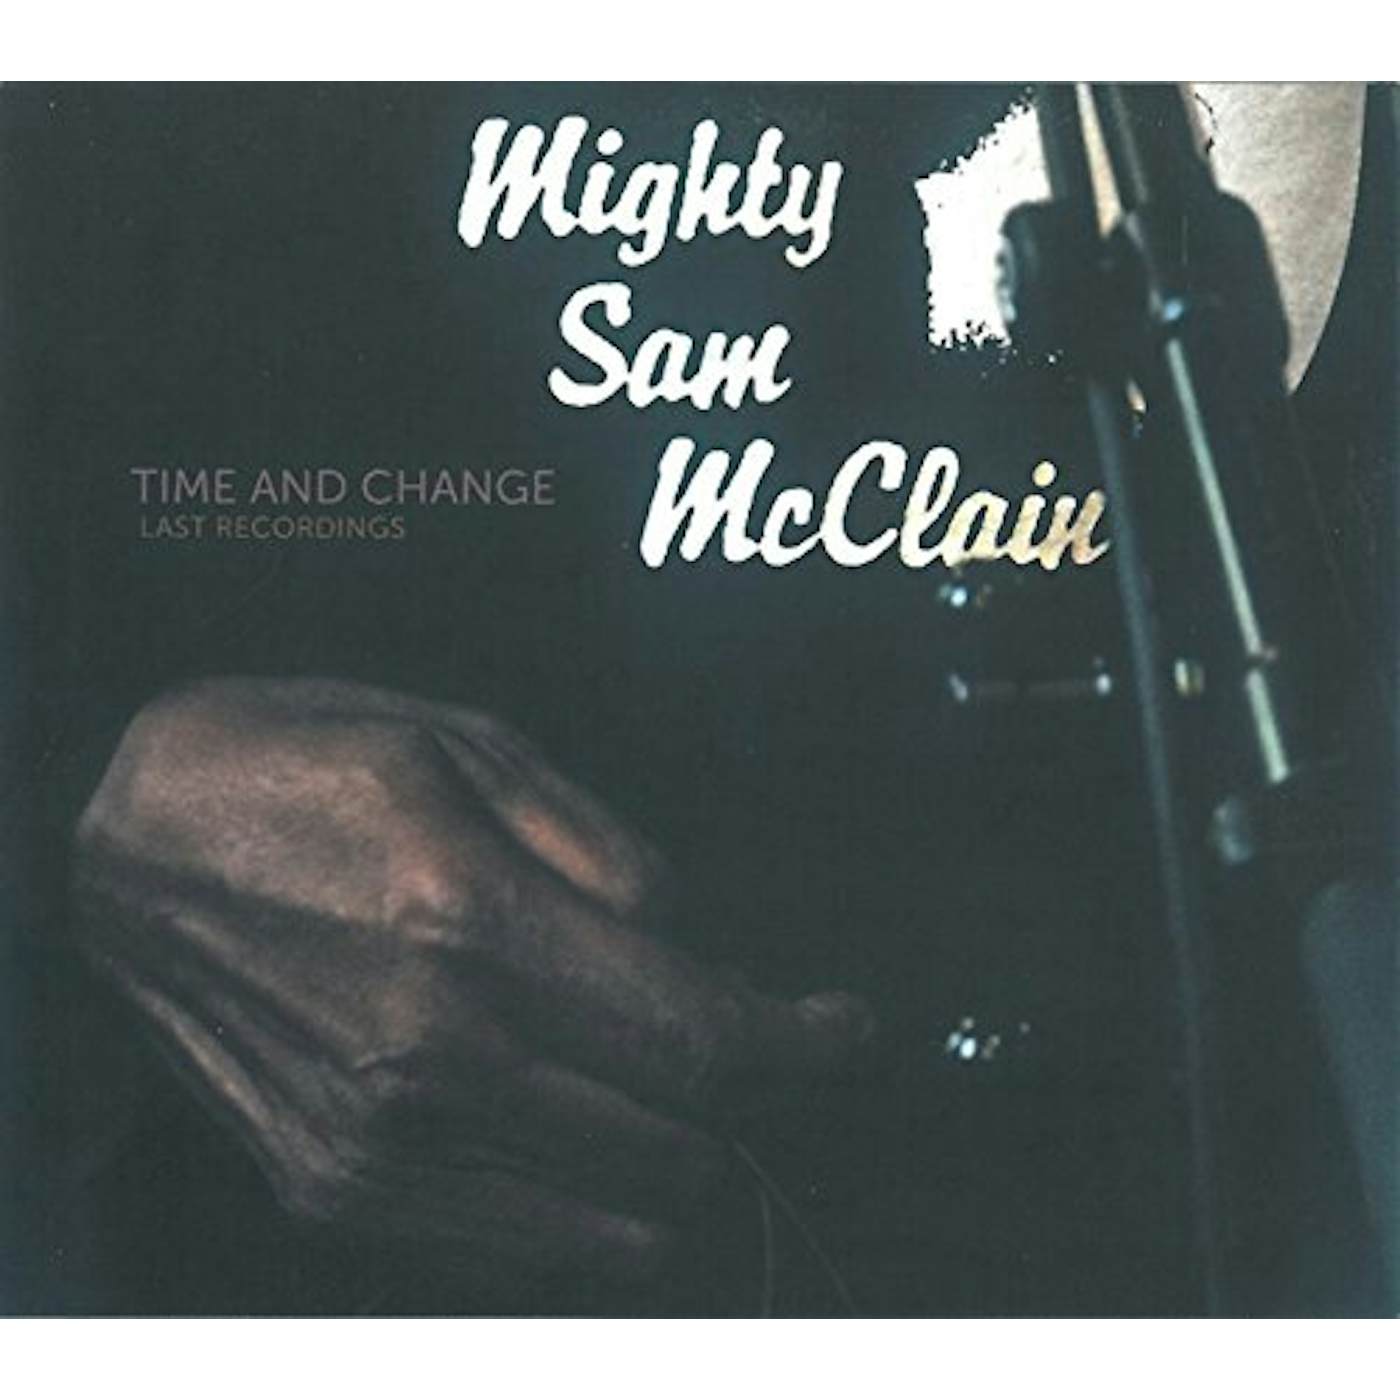 Mighty Sam McClain TIME & CHANGE: LAST RECORDINGS CD